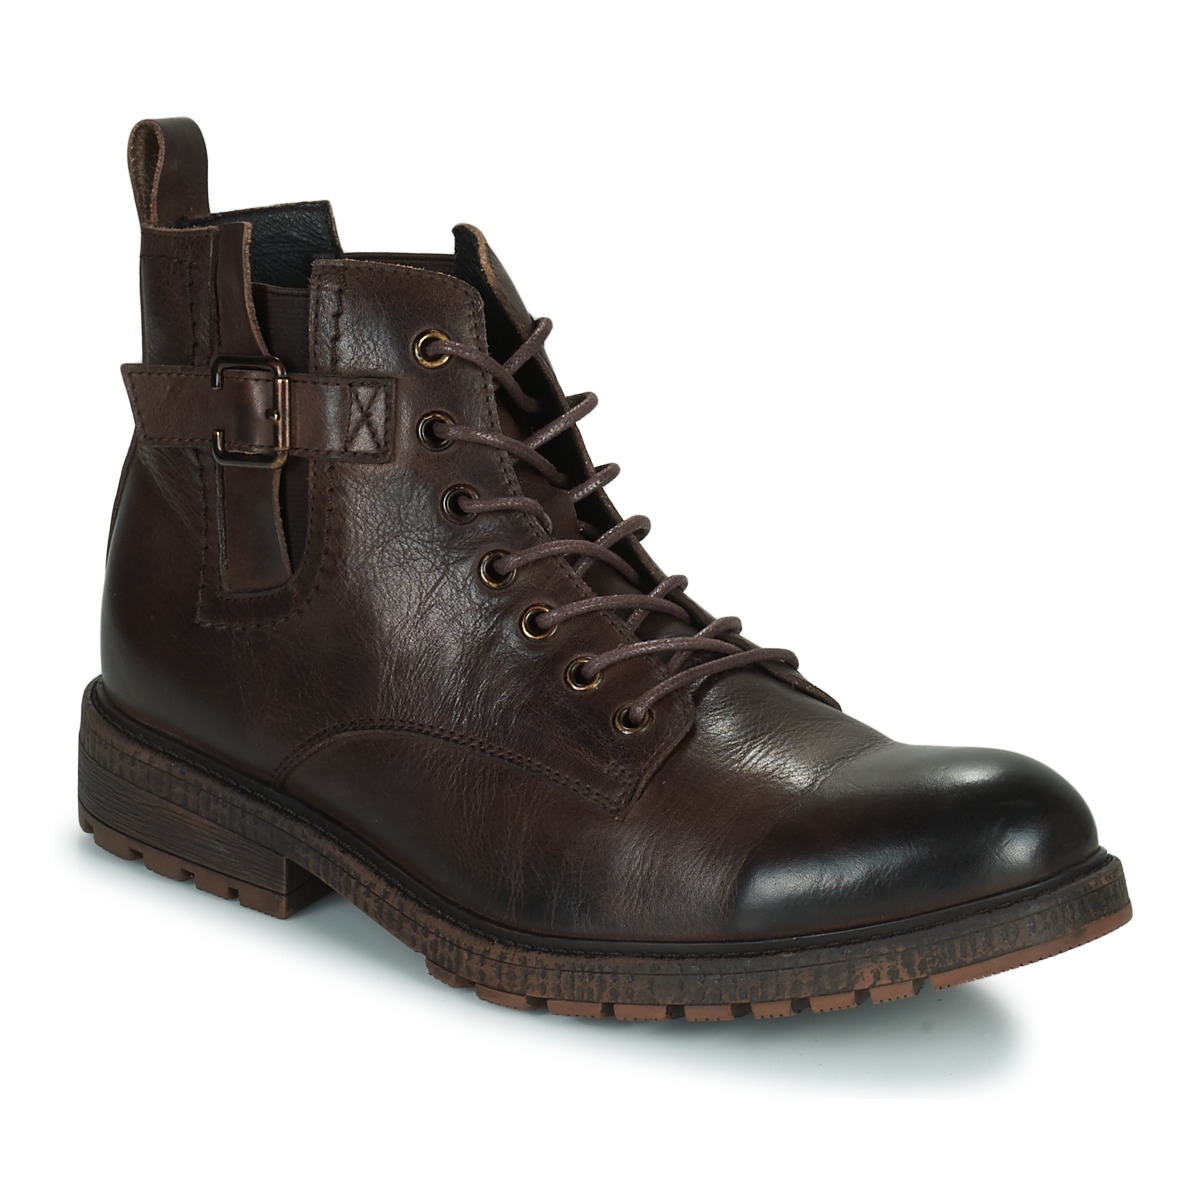 Chaussures Homme Boots Kdopa ALEGRE 